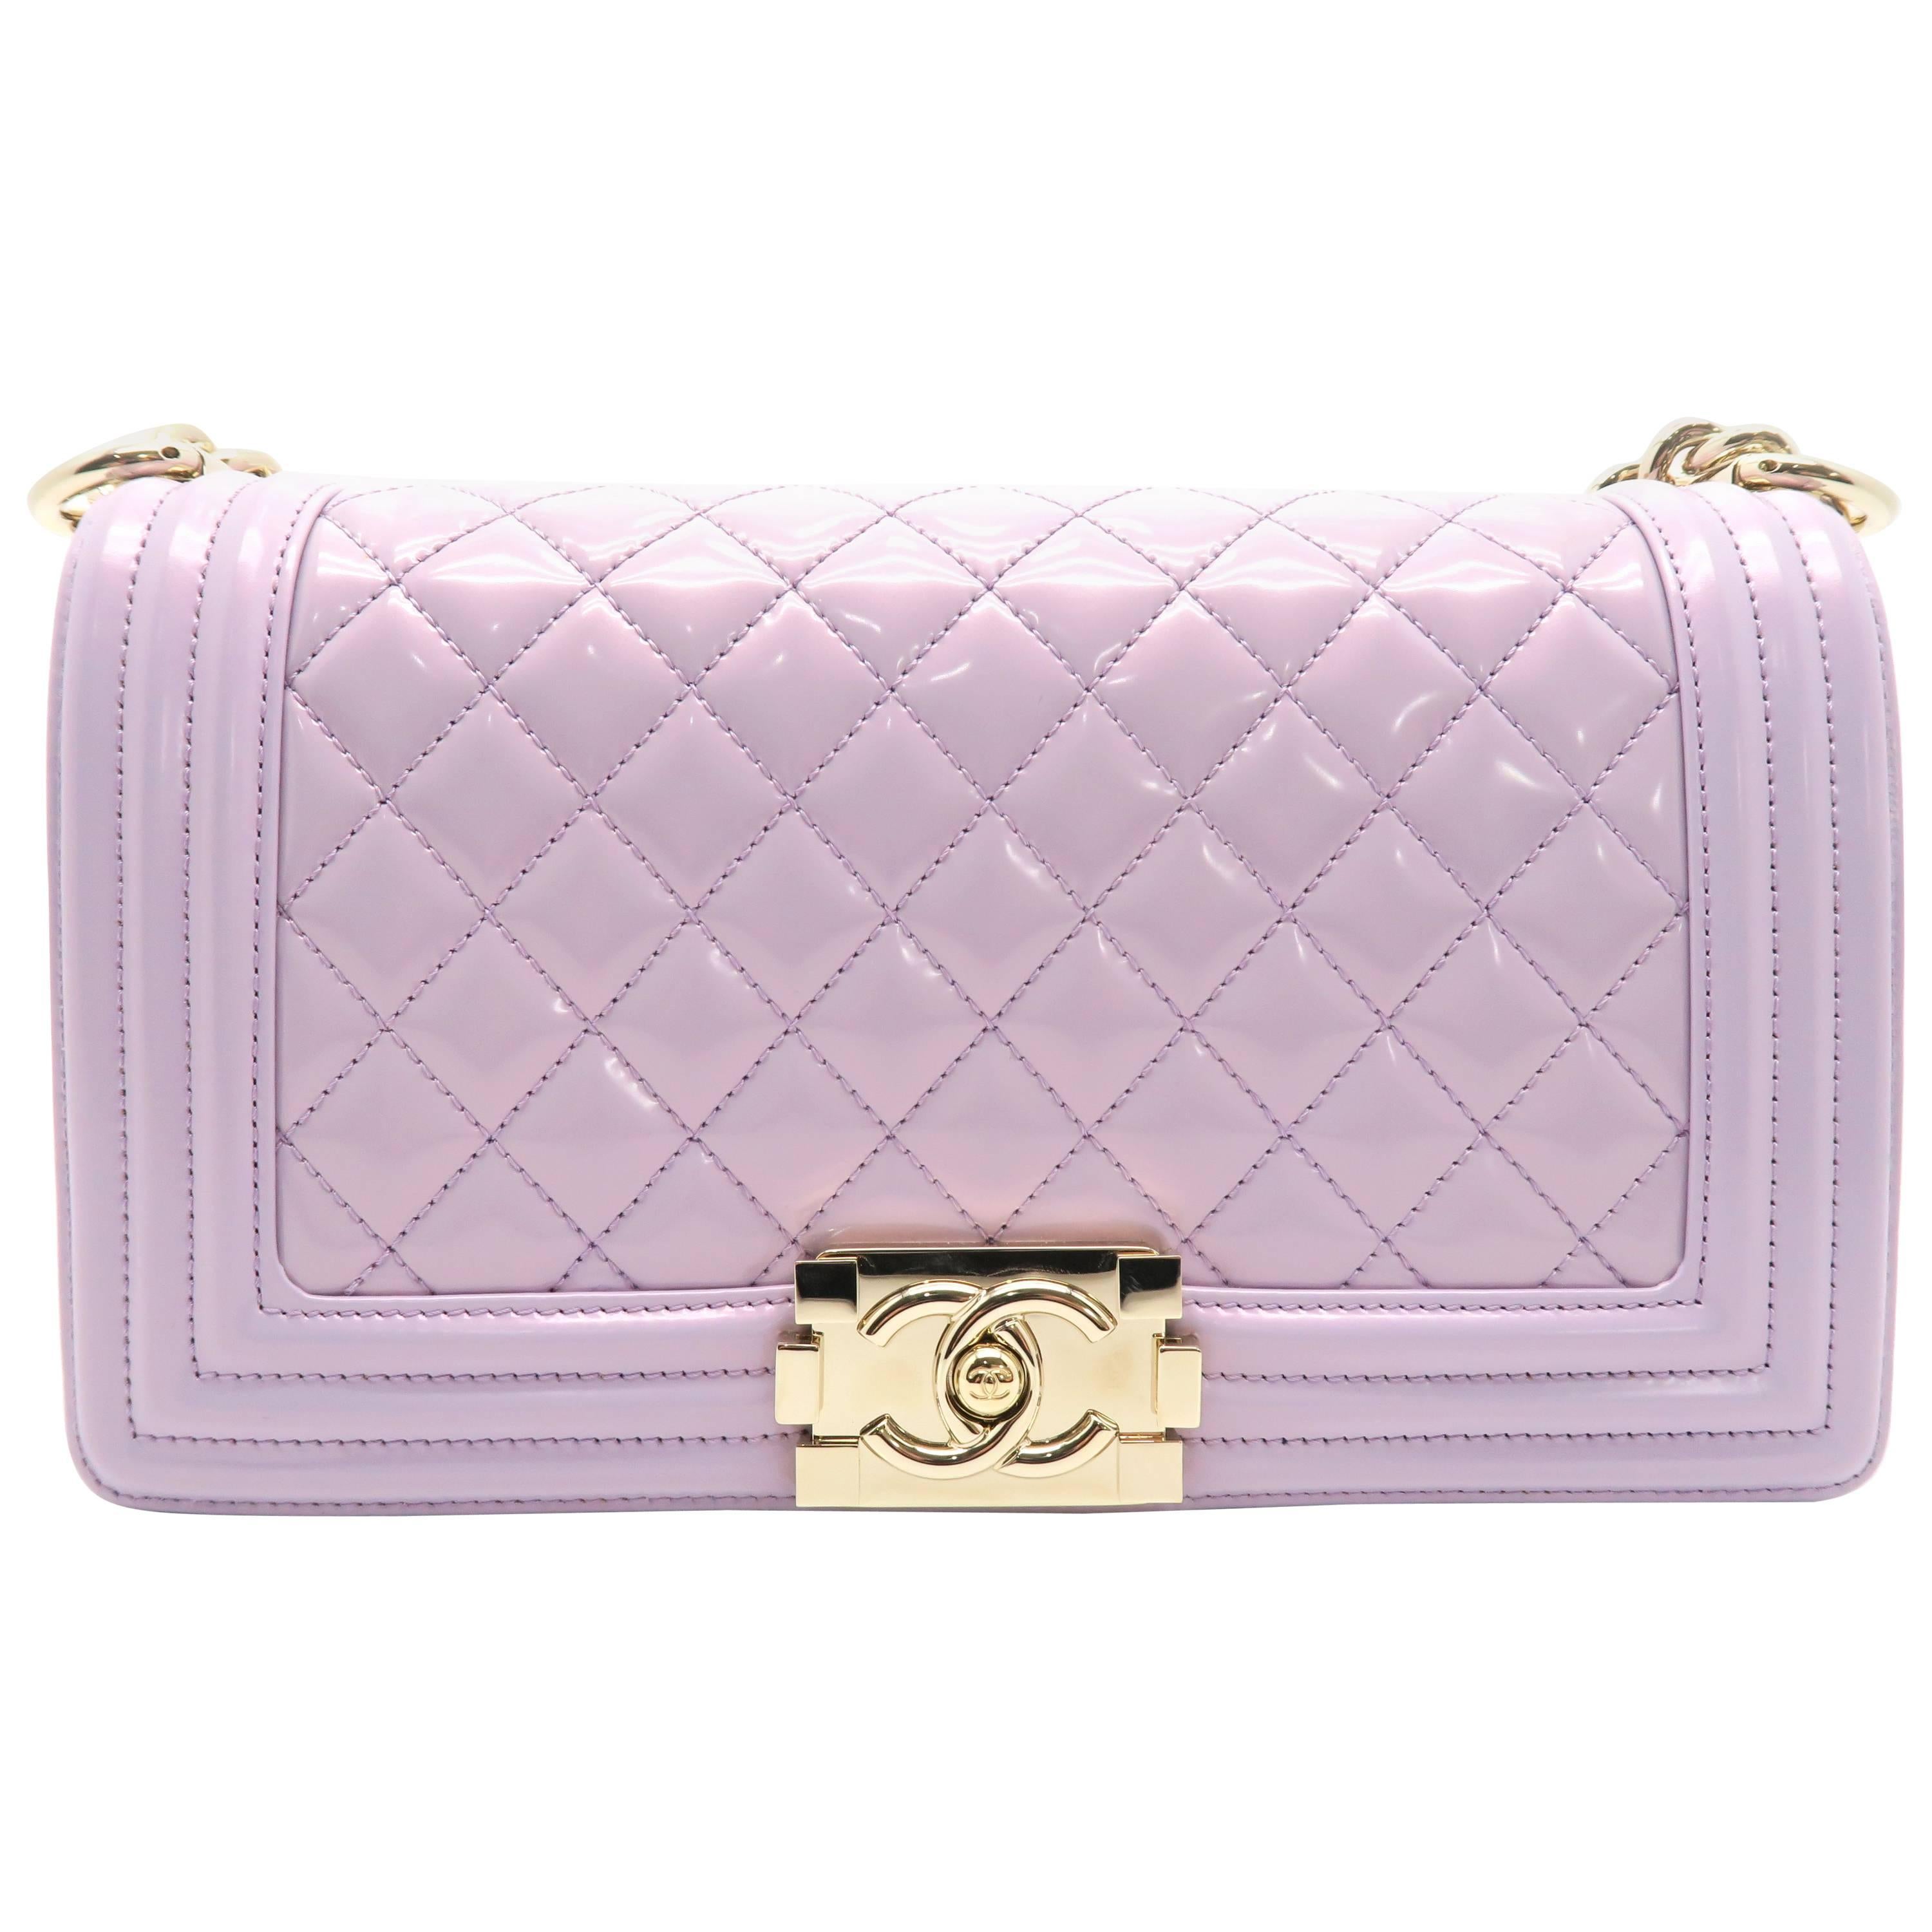 Chanel Boy Chanel Light Purple Quilting Patent Leather Chain Shoulder Bag